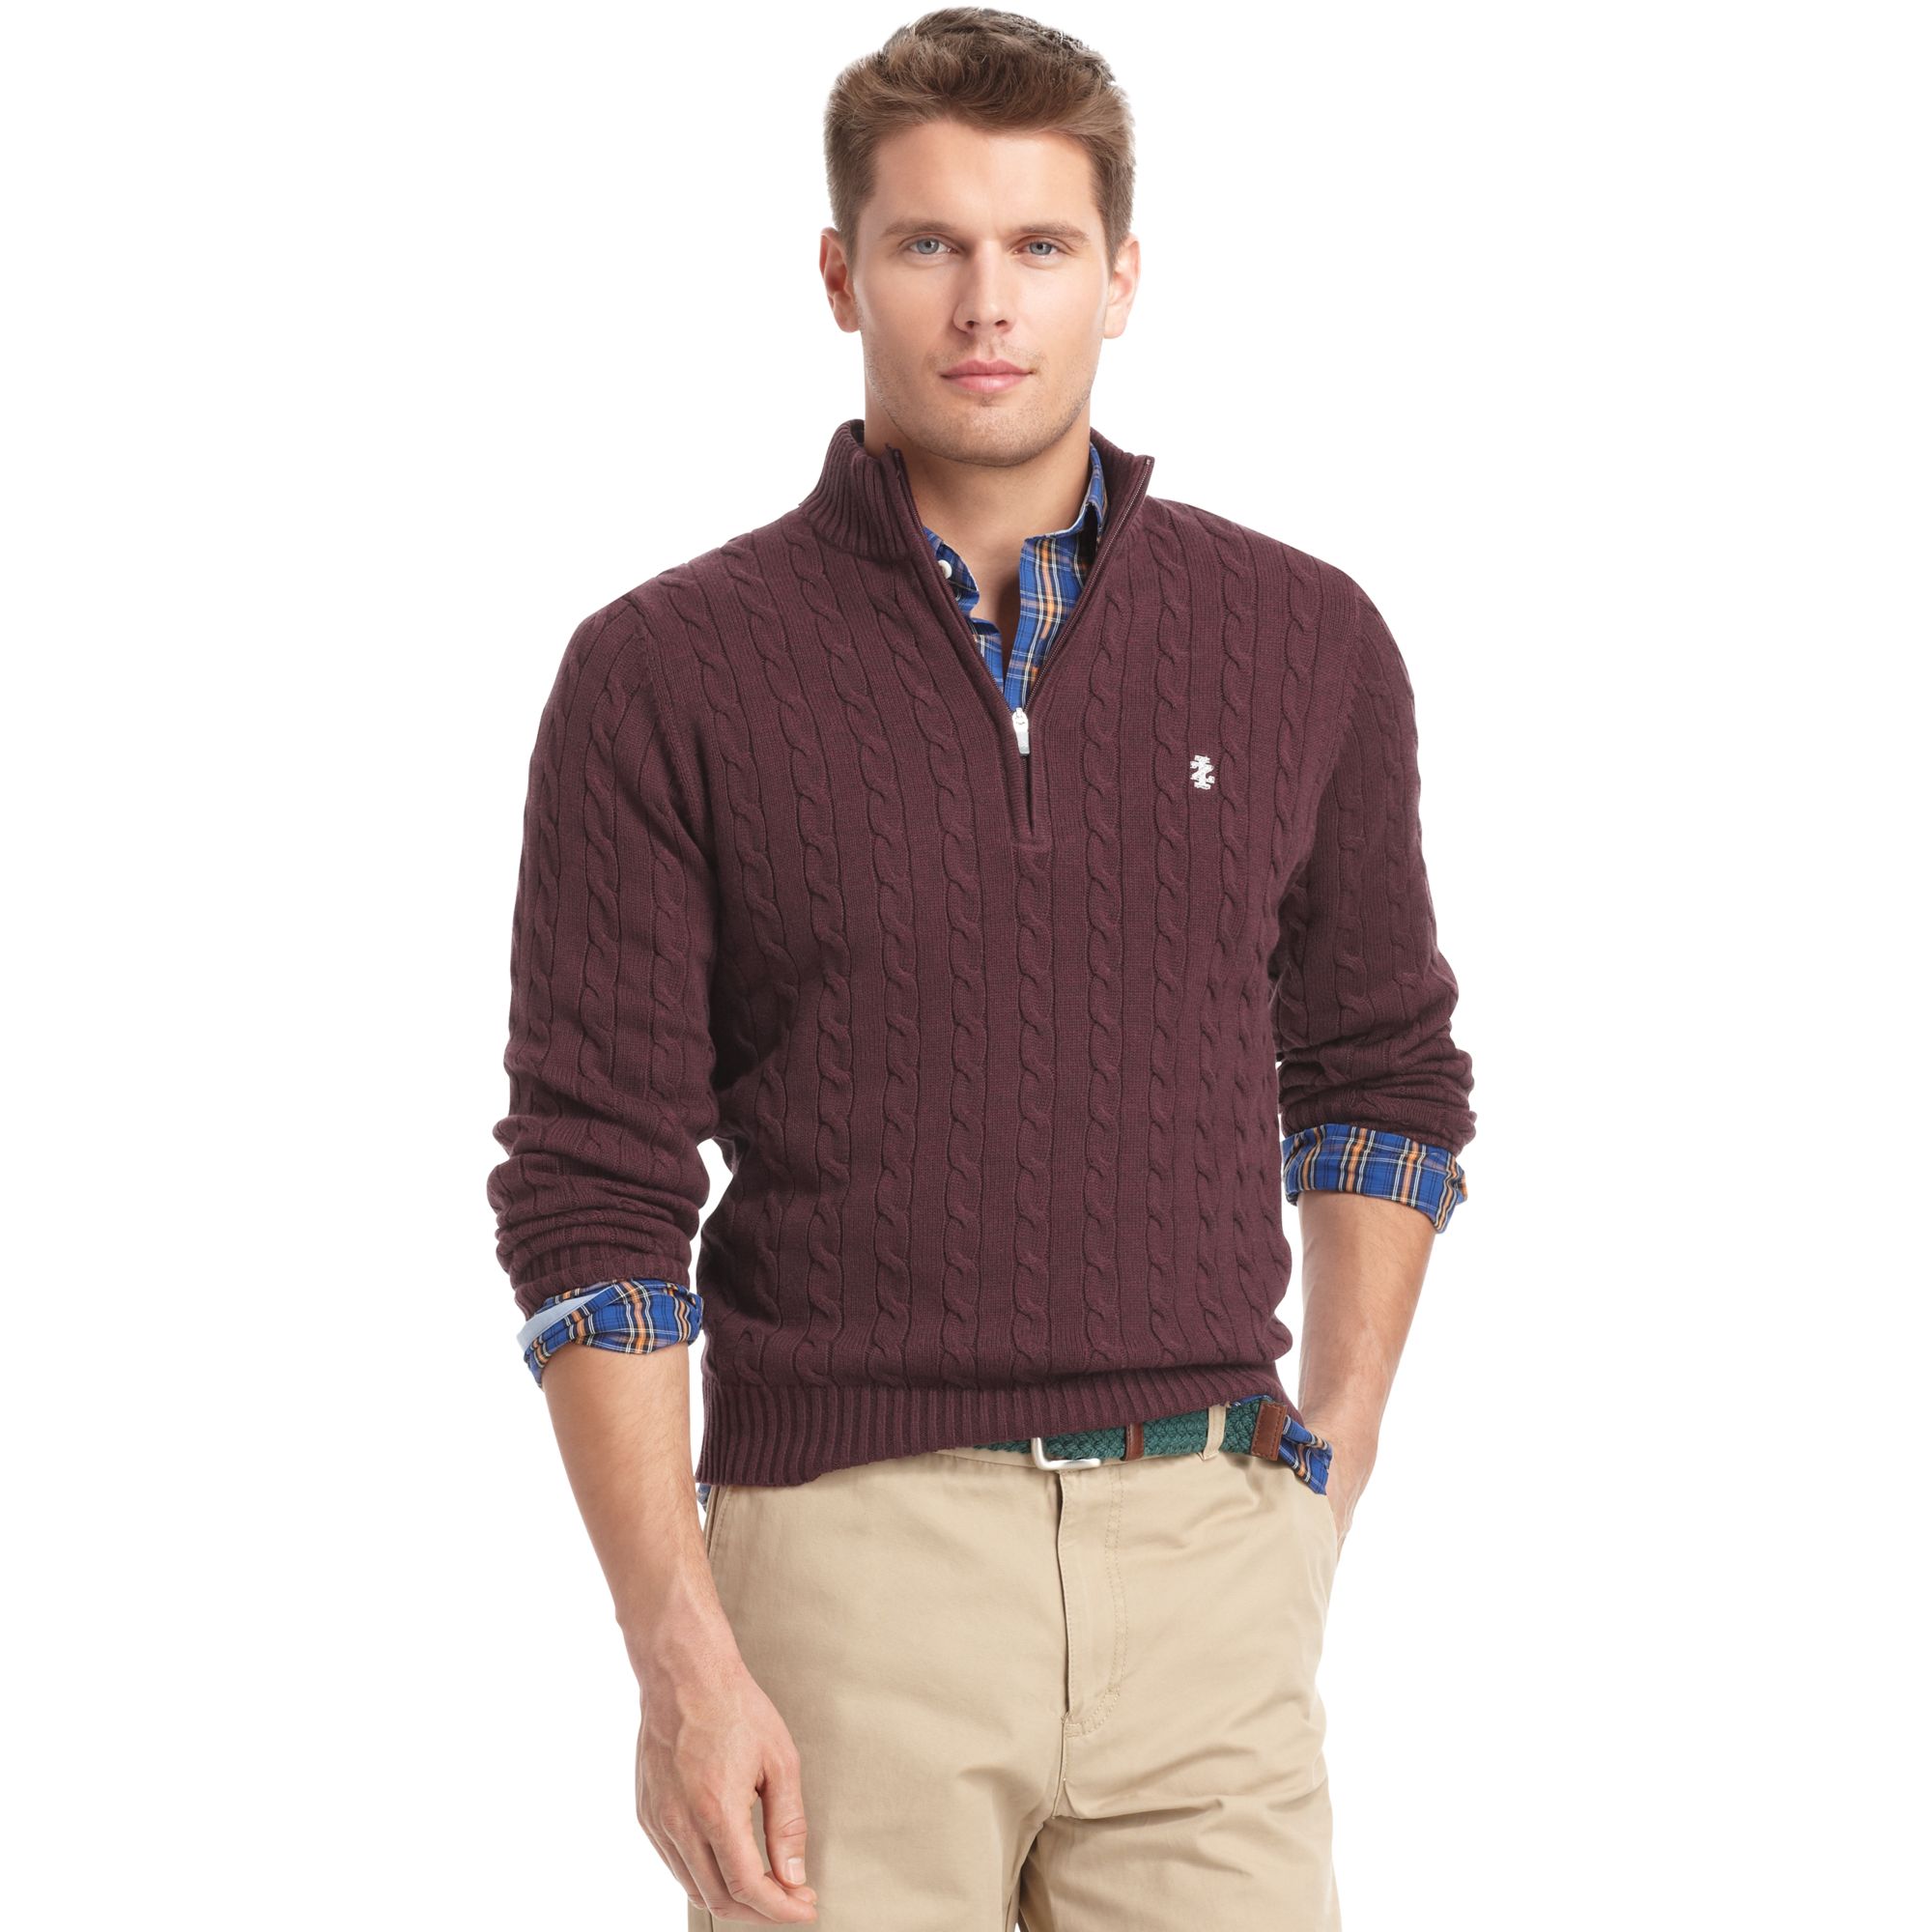 Lyst - Izod Sweater Quarterzip Mock Neck Cable Knit Pullover in Purple ...